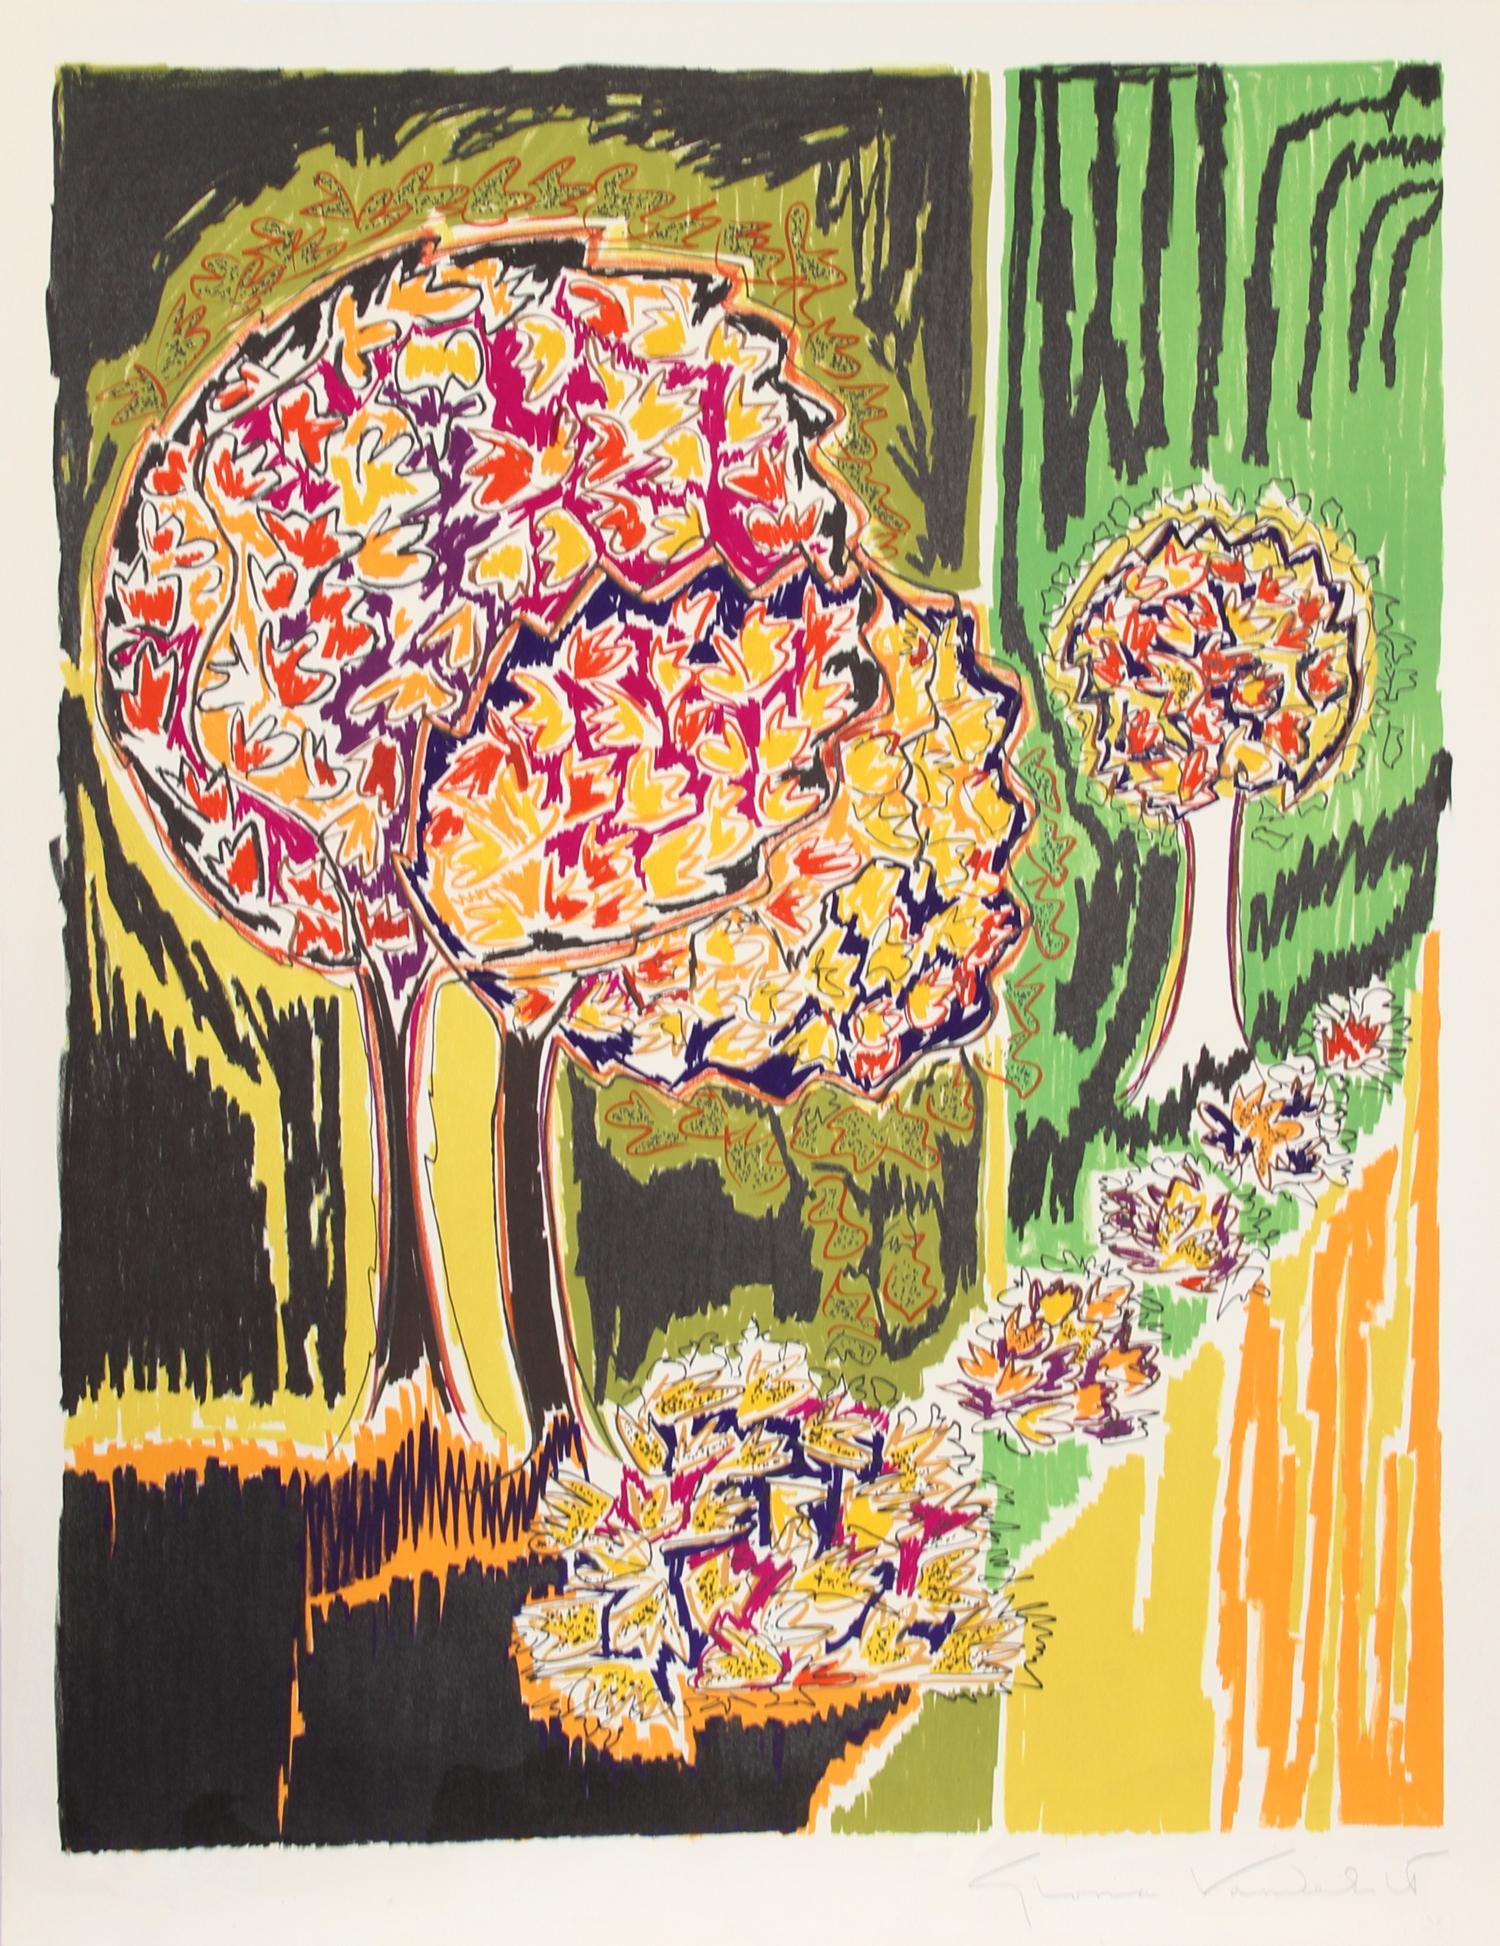 Artist: Gloria Vanderbilt, American (1924 - )
Title: Autumn
Year: circa 1970
Medium: Silkscreen on Arches Paper, Signed and numbered in Pencil
Edition: 250
Size: 31 in. x 24 in. (78.74 cm x 60.96 cm)

Publisher: Shorewood